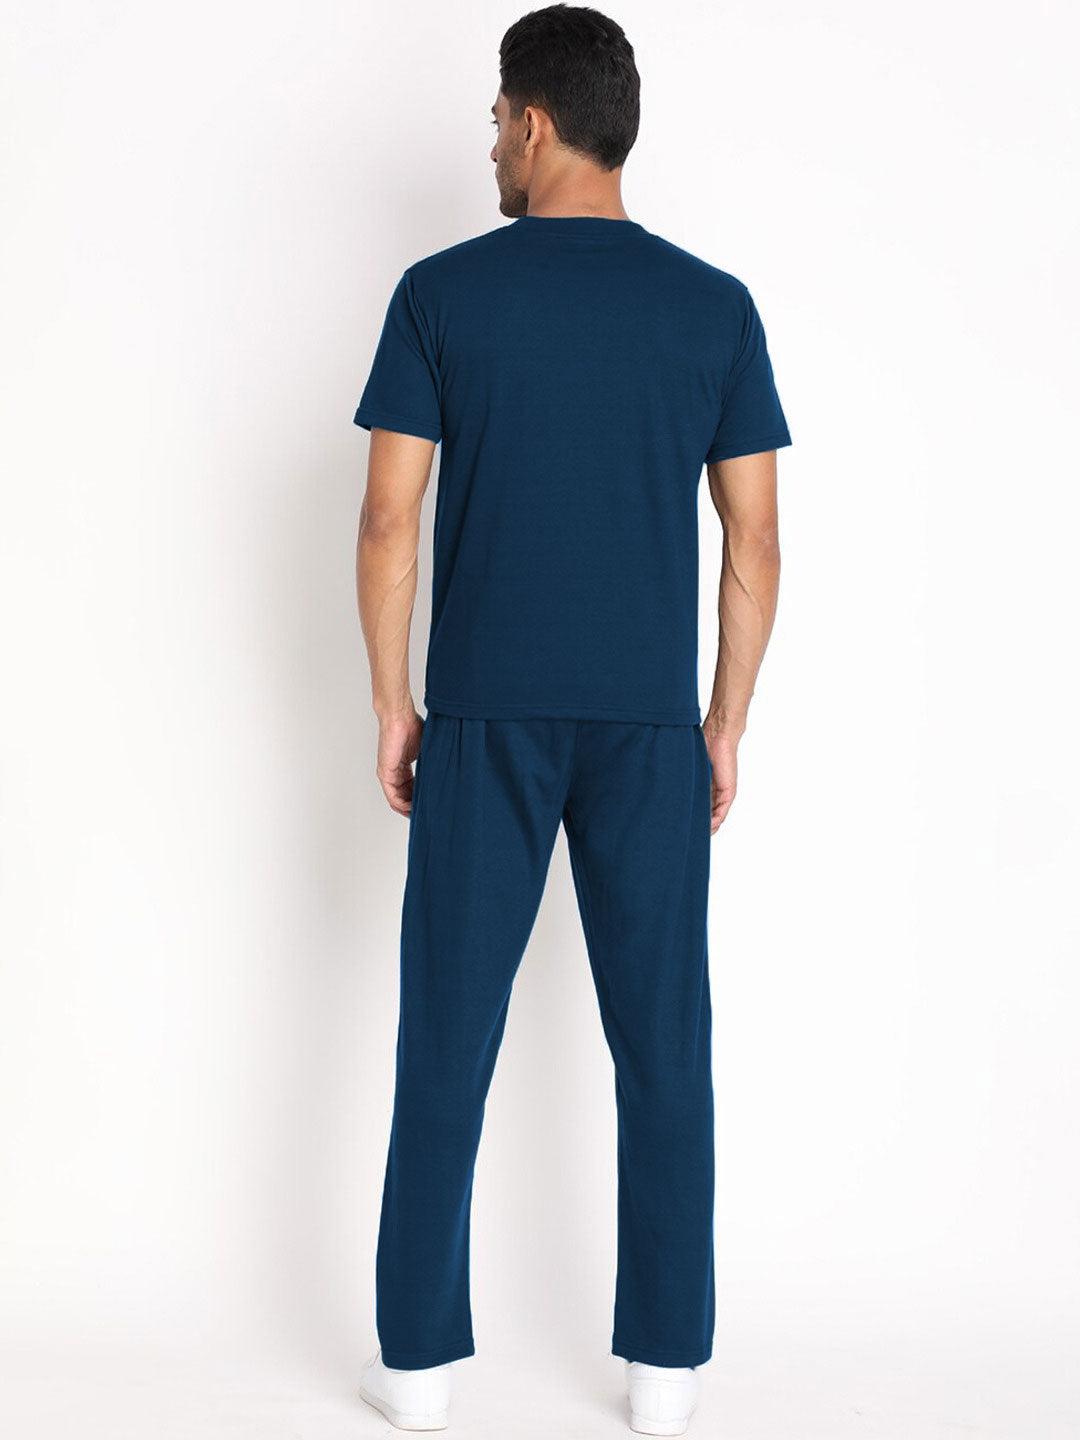 Men Fitted Track Suits in Nevy Blue Colour - Aadhitri